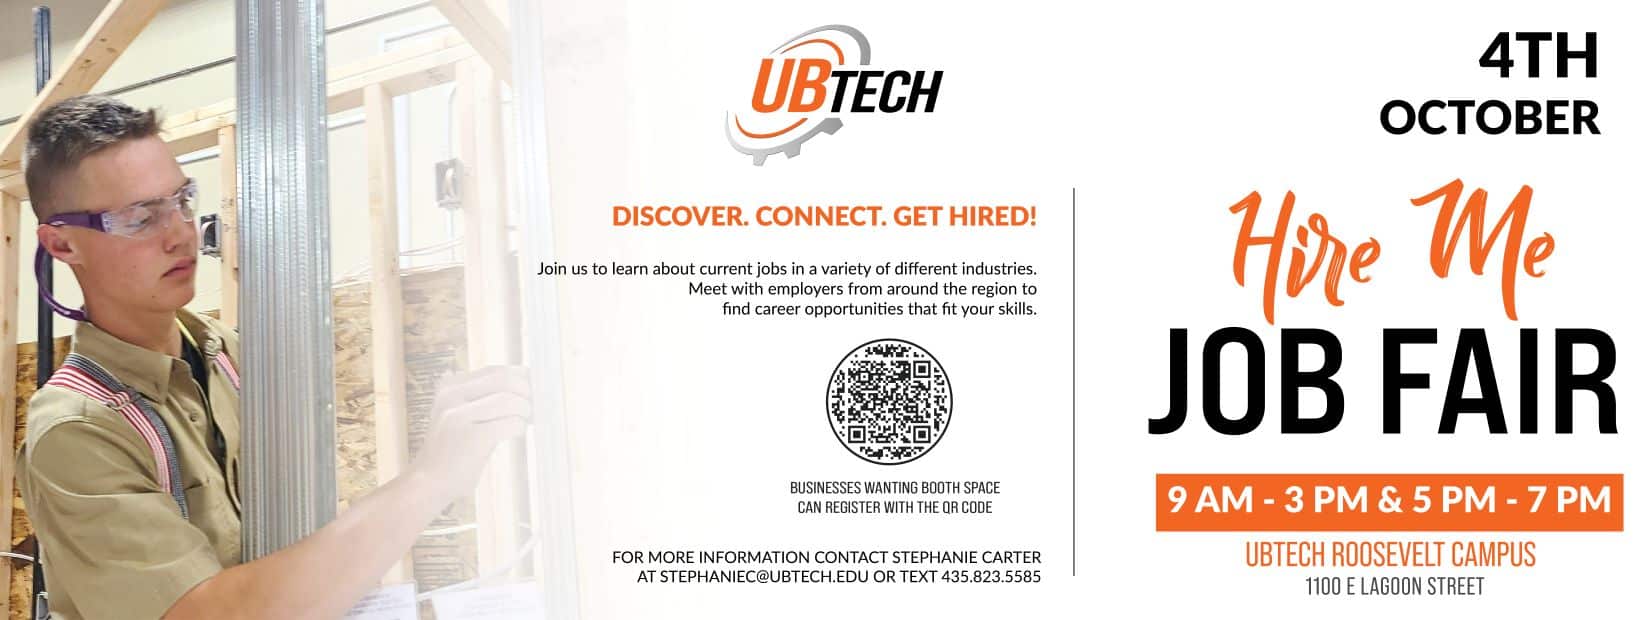 UBtech Hire Me Job Fair. October 4th from 9:00am to 3:00pm, and from 5:00pm to 7:00pm.  Join us to learn about current jobs in a variety of different industries. Meet with employers from around the region to find career opportunities that fit your skills. For more information contact Stephanie Carter at Stephaniec@ubtech.edu, or text 435.823.5585